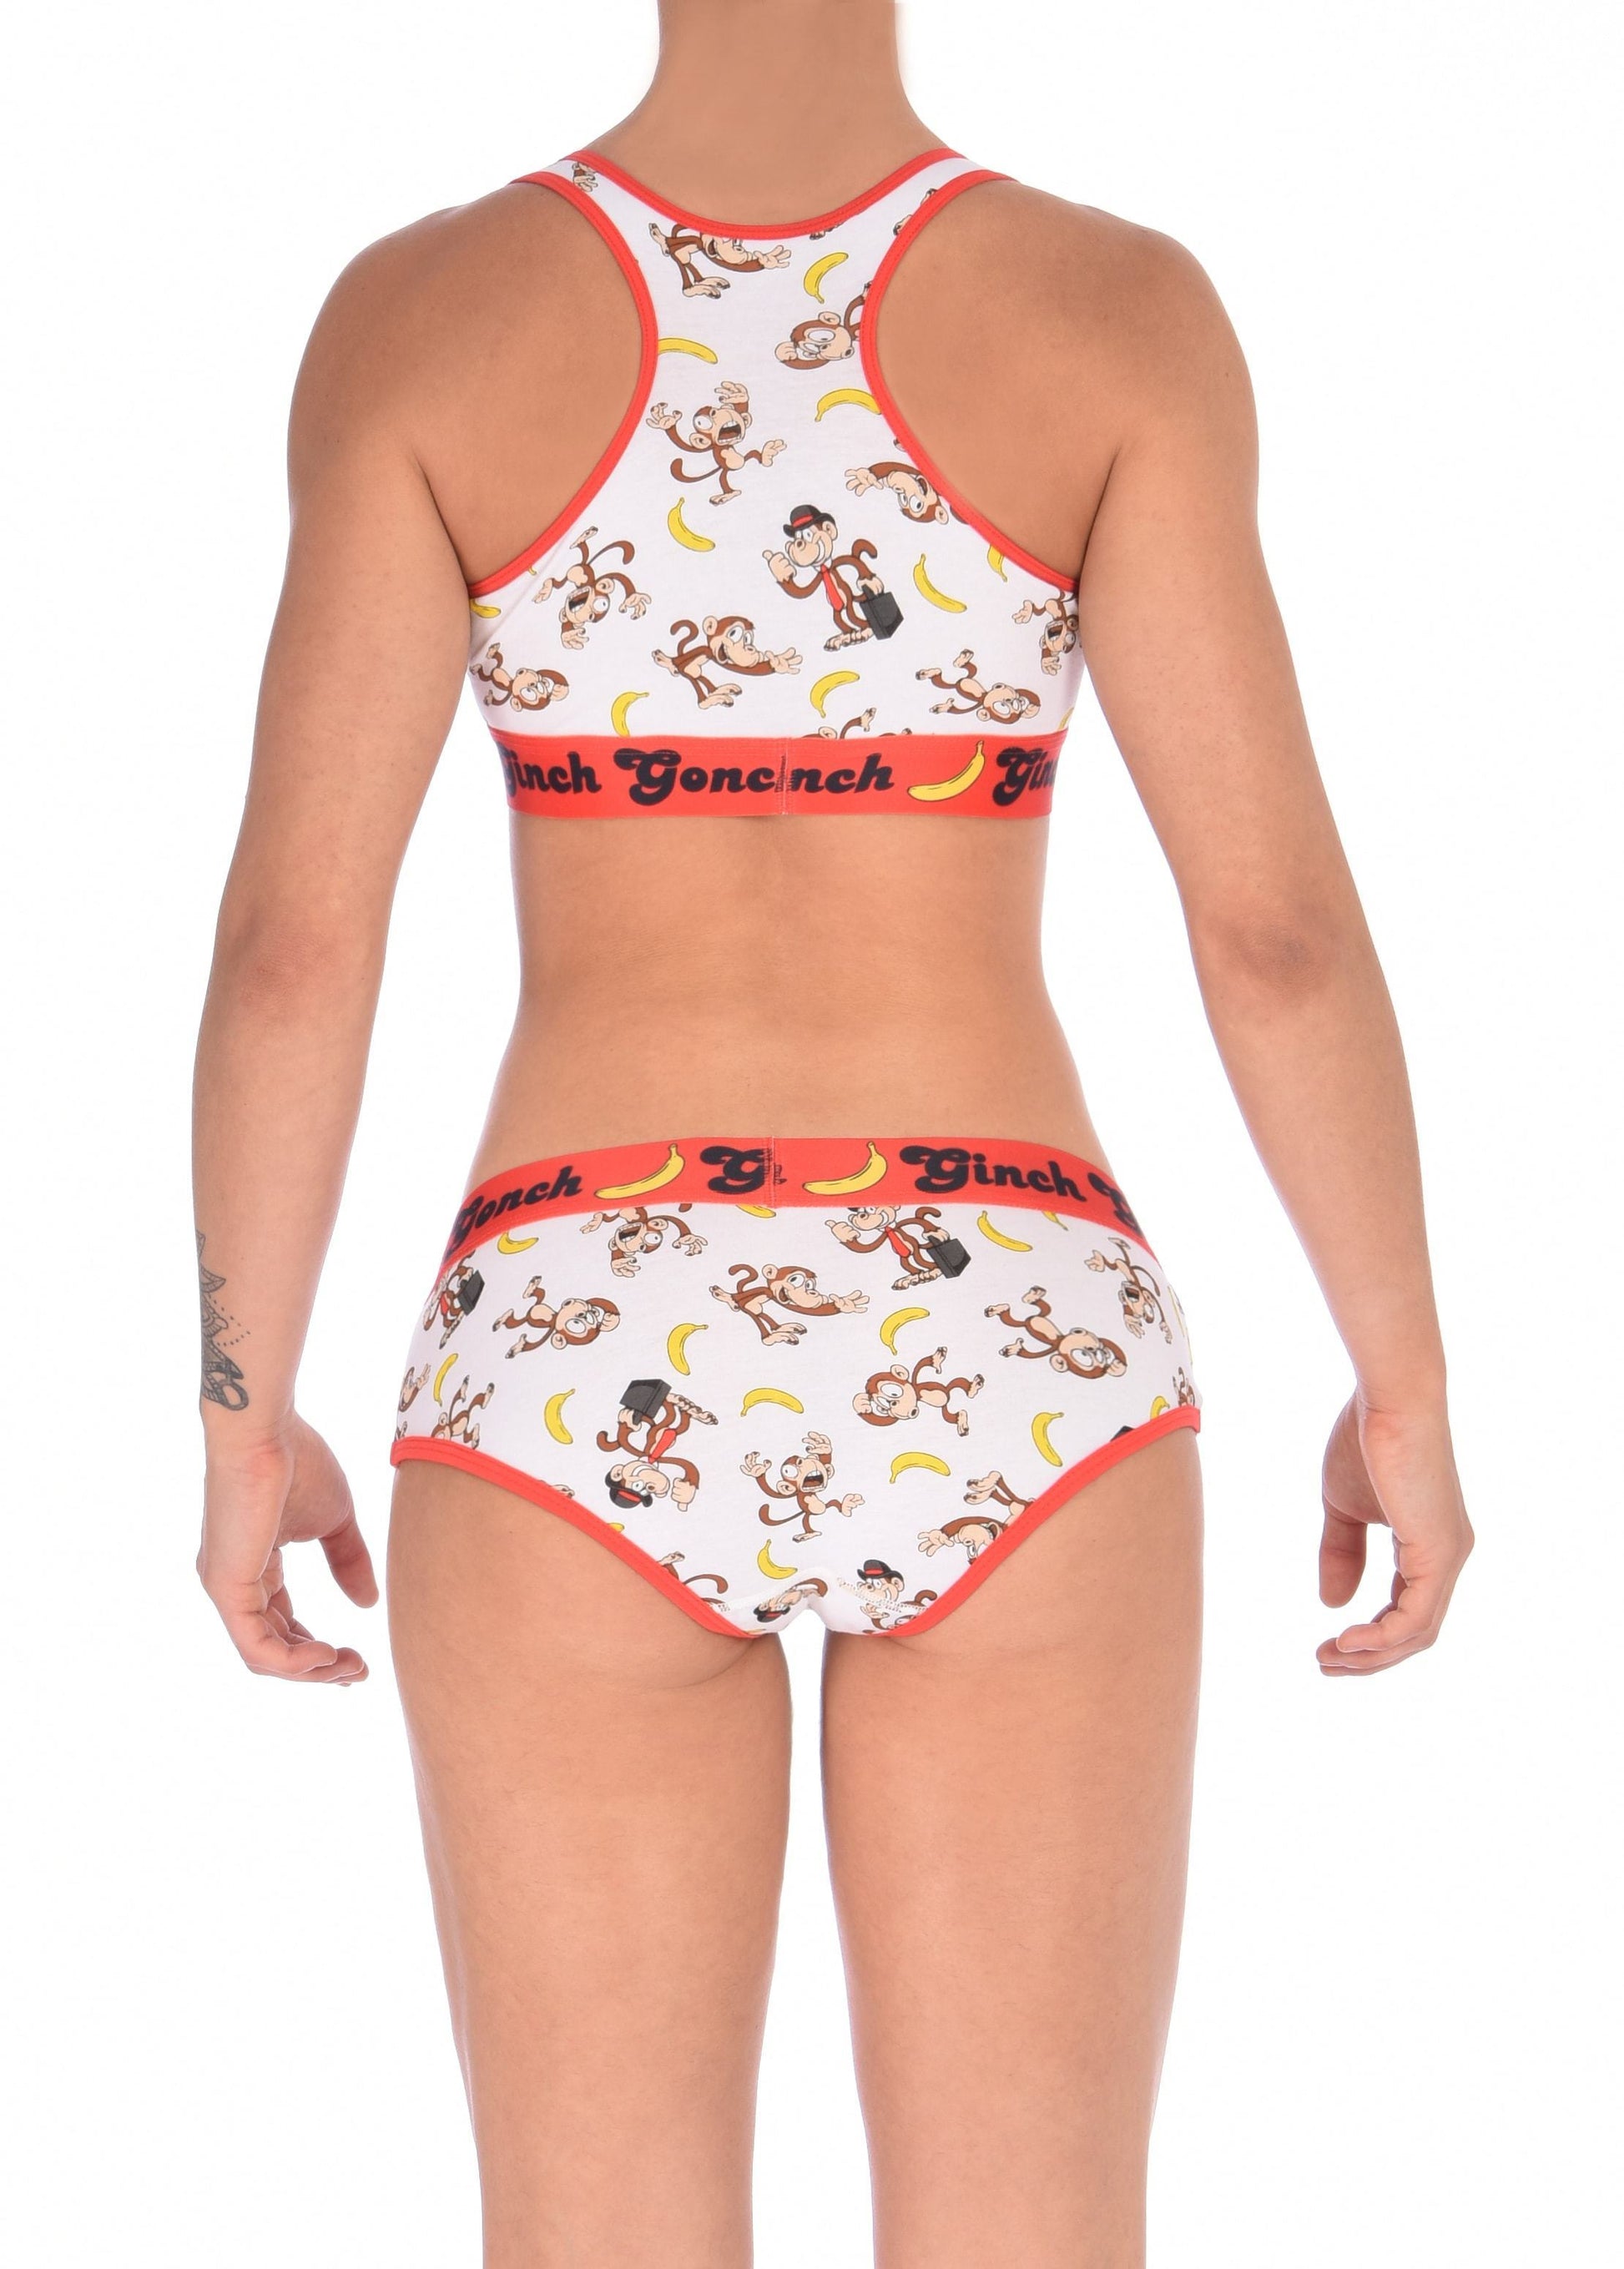 GG Ginch Gonch Gone Bananas boy cut Brief women's underwear y front white fabric with monkeys and bananas red trim and red printed waistband back shown with matching sports bra